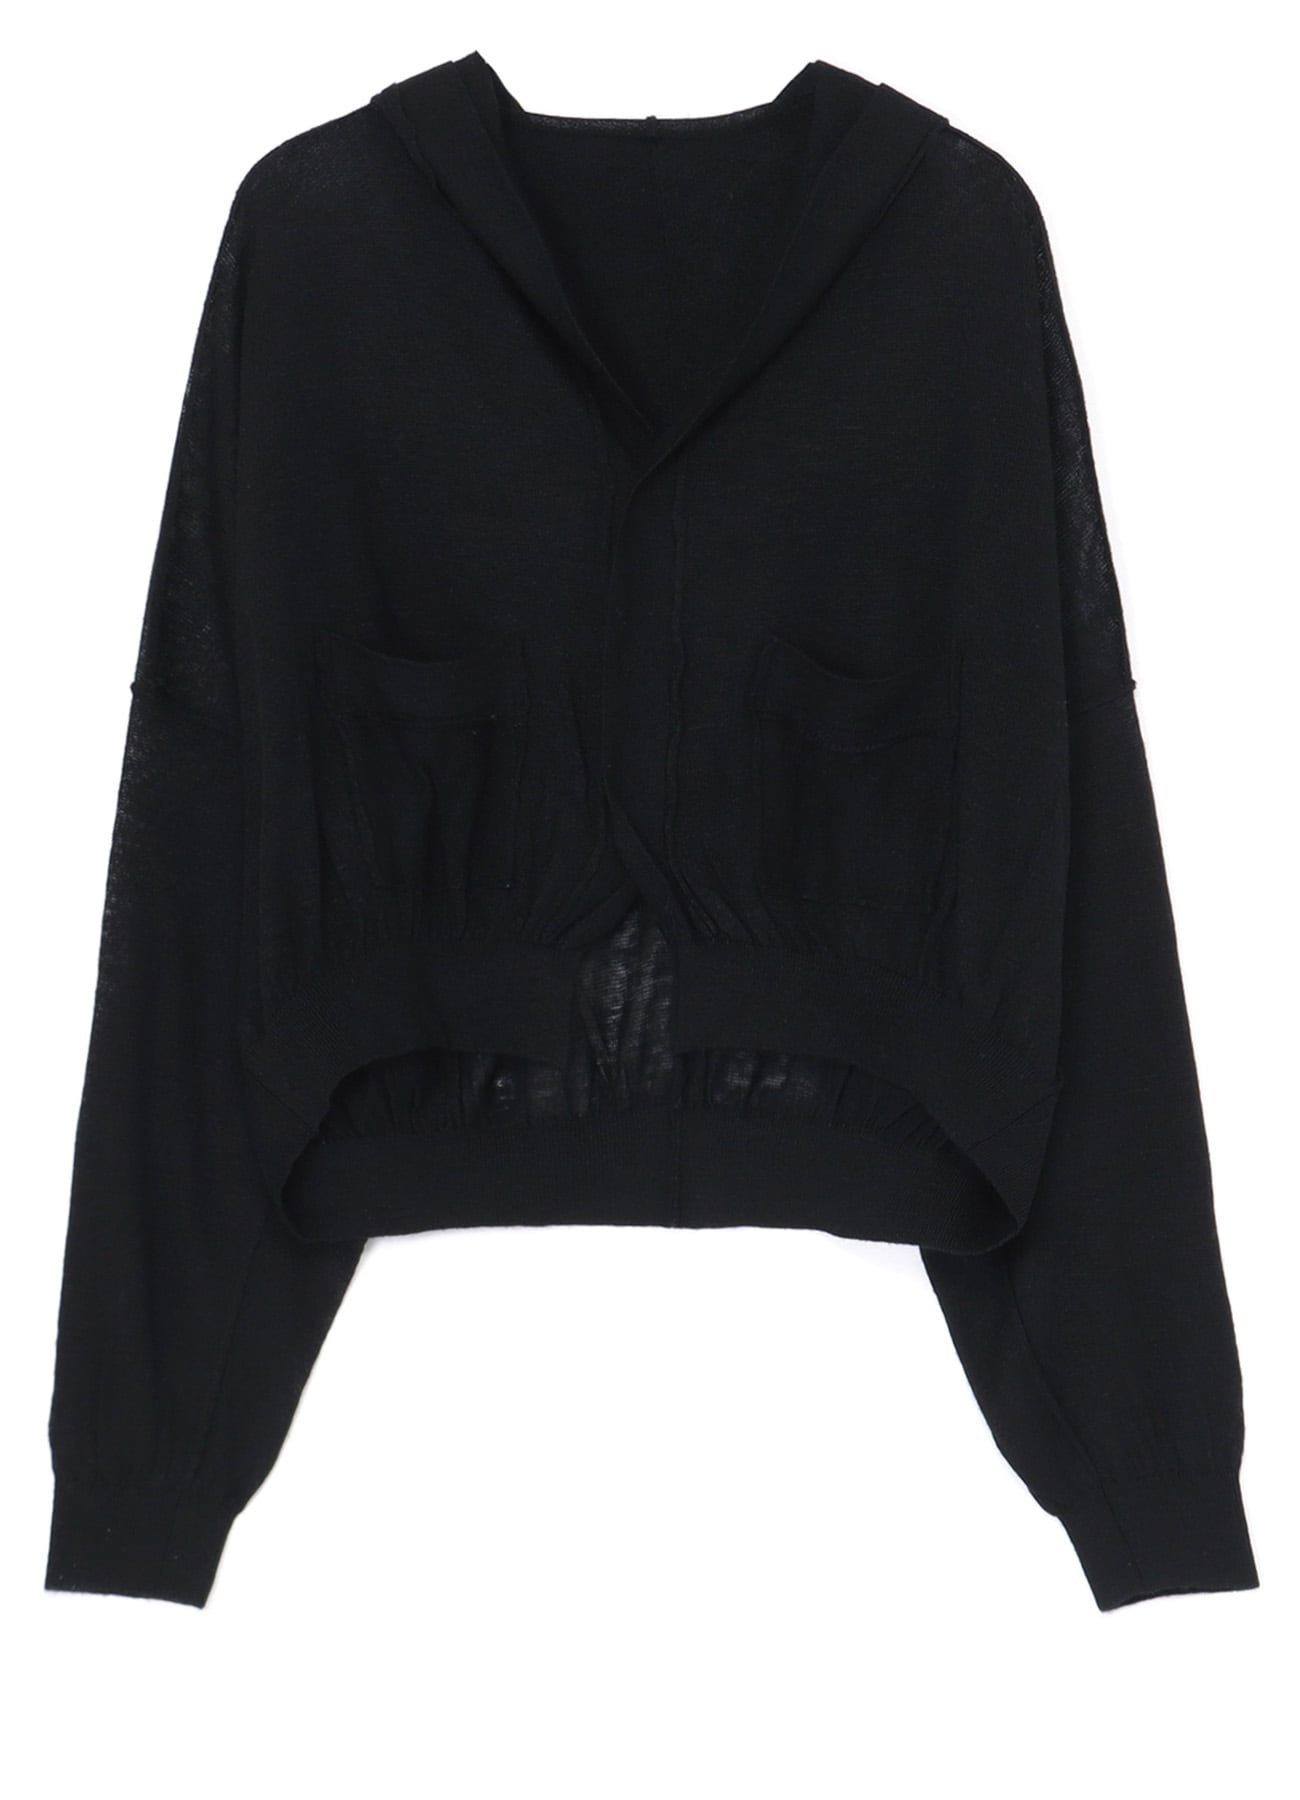 12G1P JERSEY CROPPED HOODED KNIT CARDIGAN(S Black): Y's｜THE SHOP 